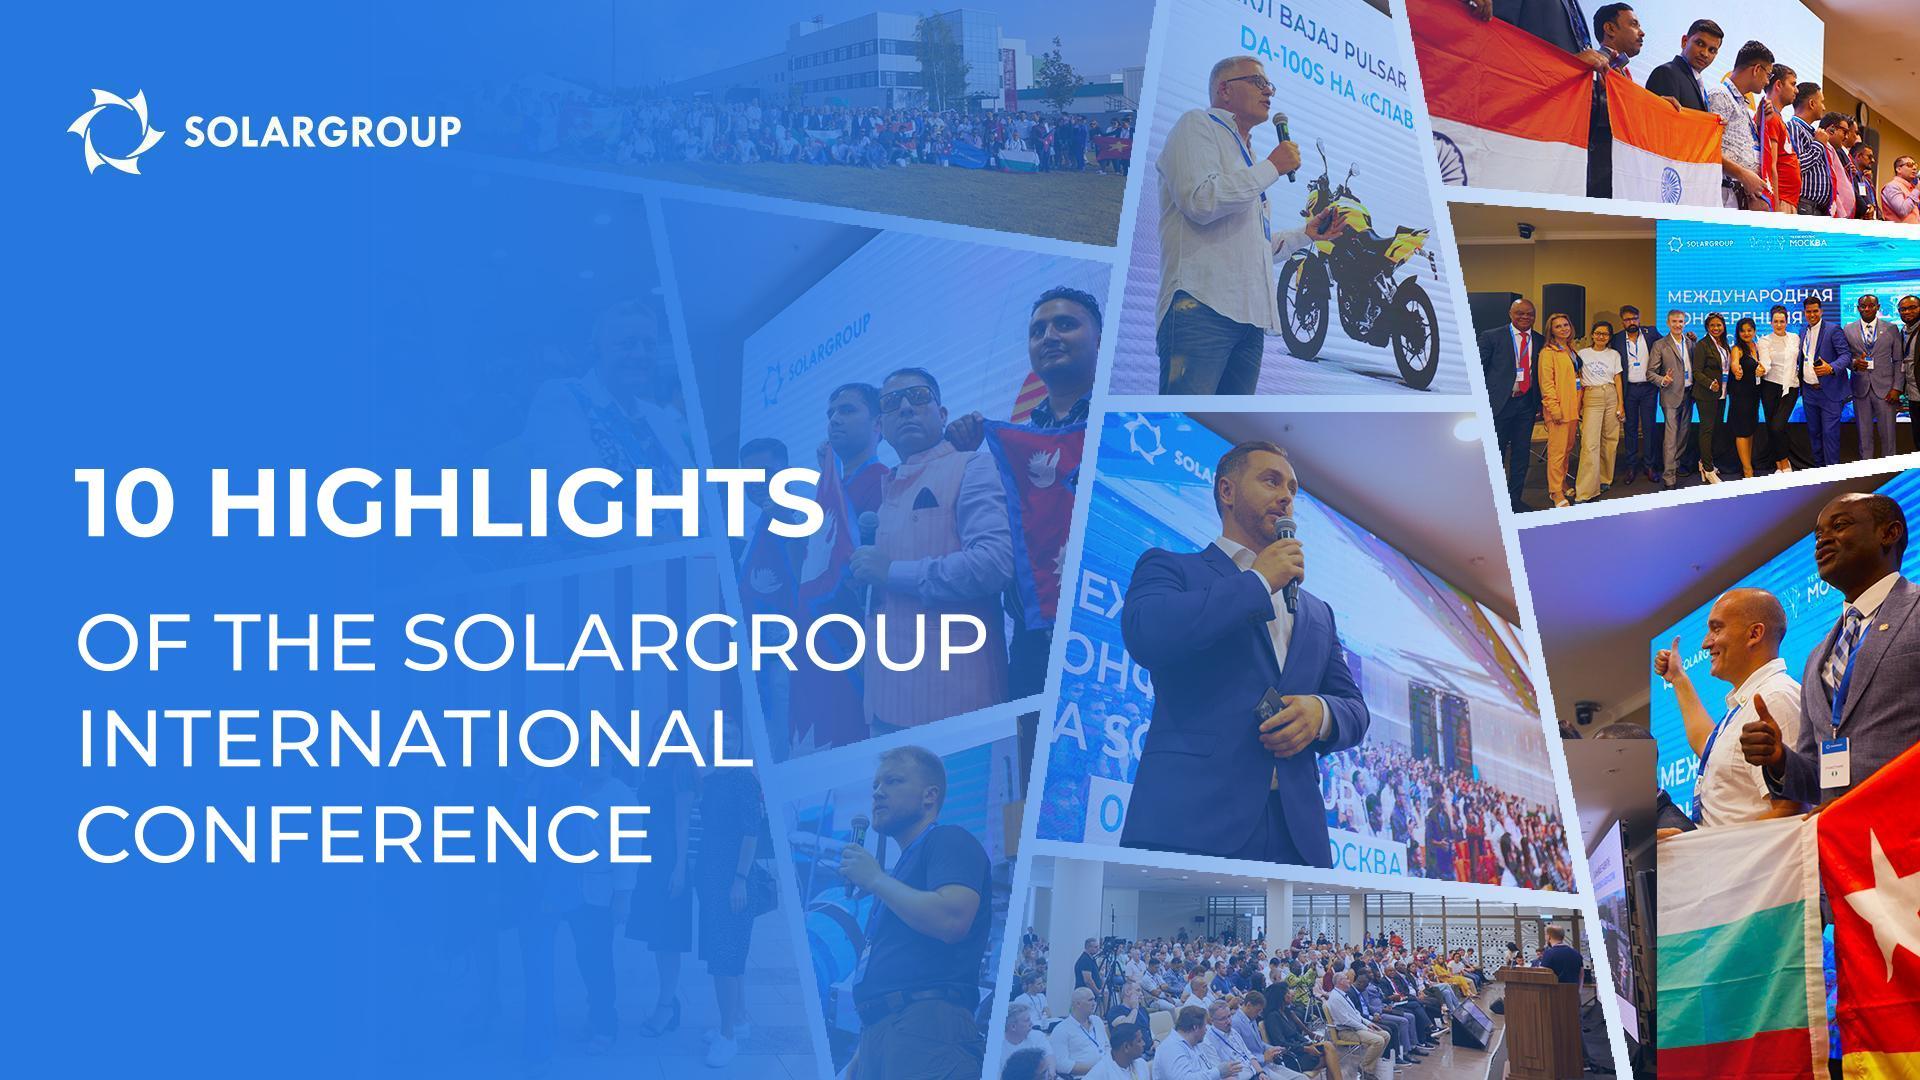 10 highlights of the SOLARGROUP International Conference